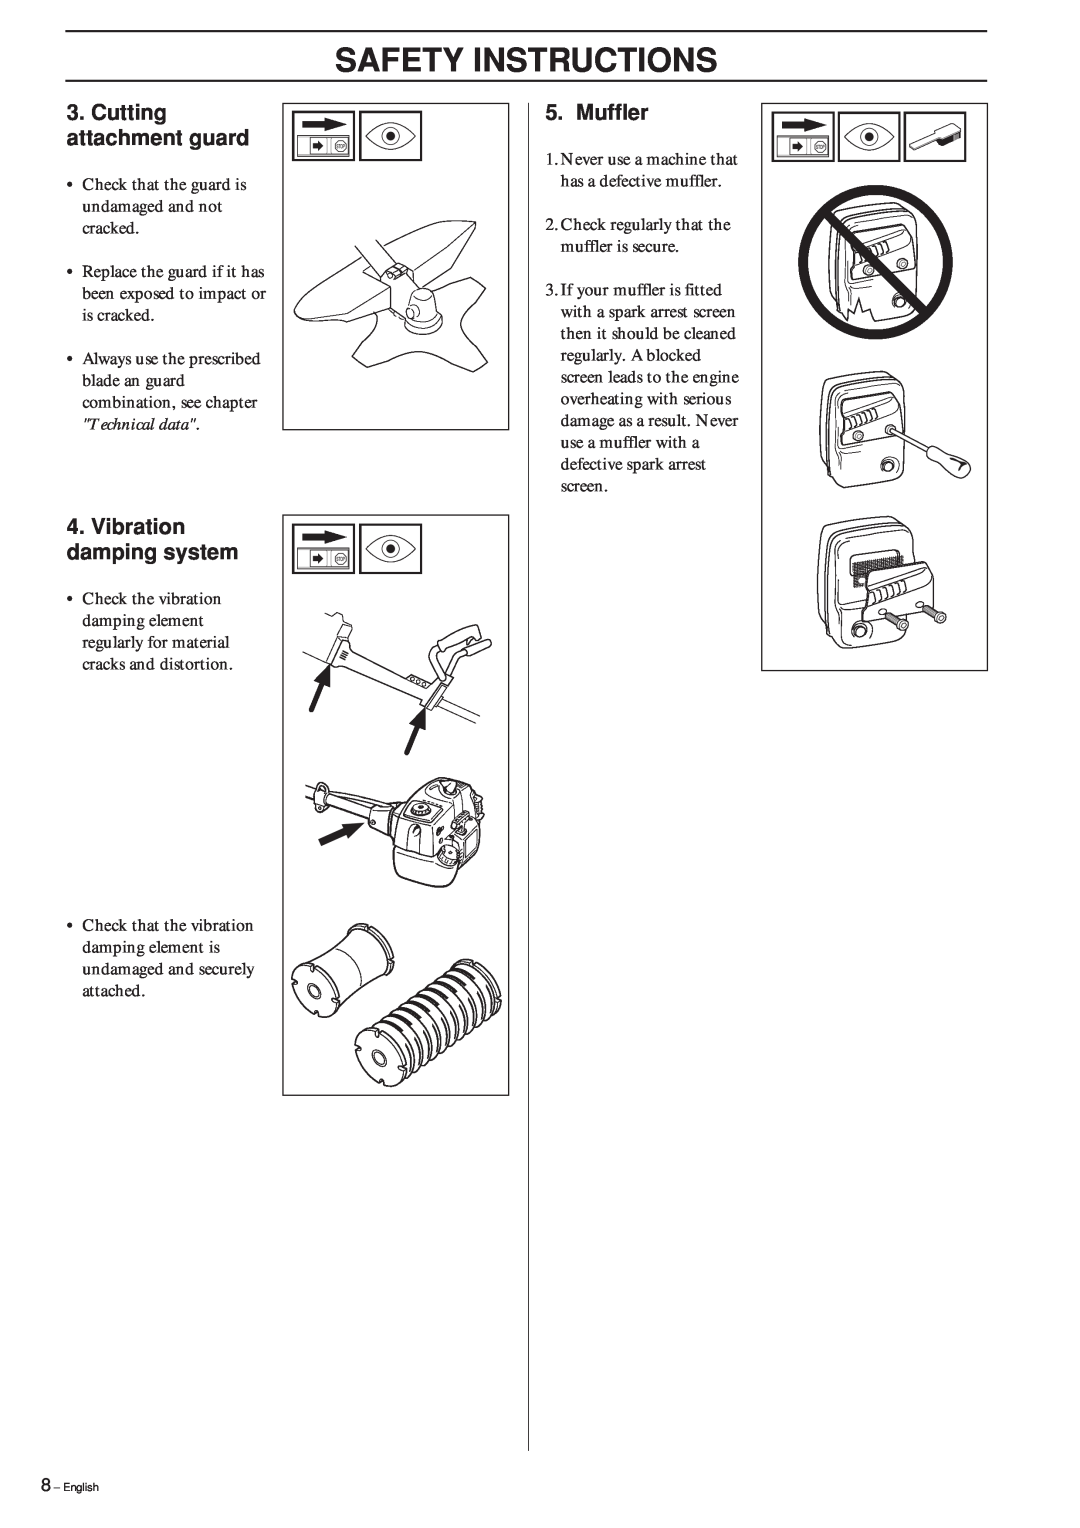 Jonsered GR 2126D manual Safety Instructions, Check that the guard is undamaged and not cracked 